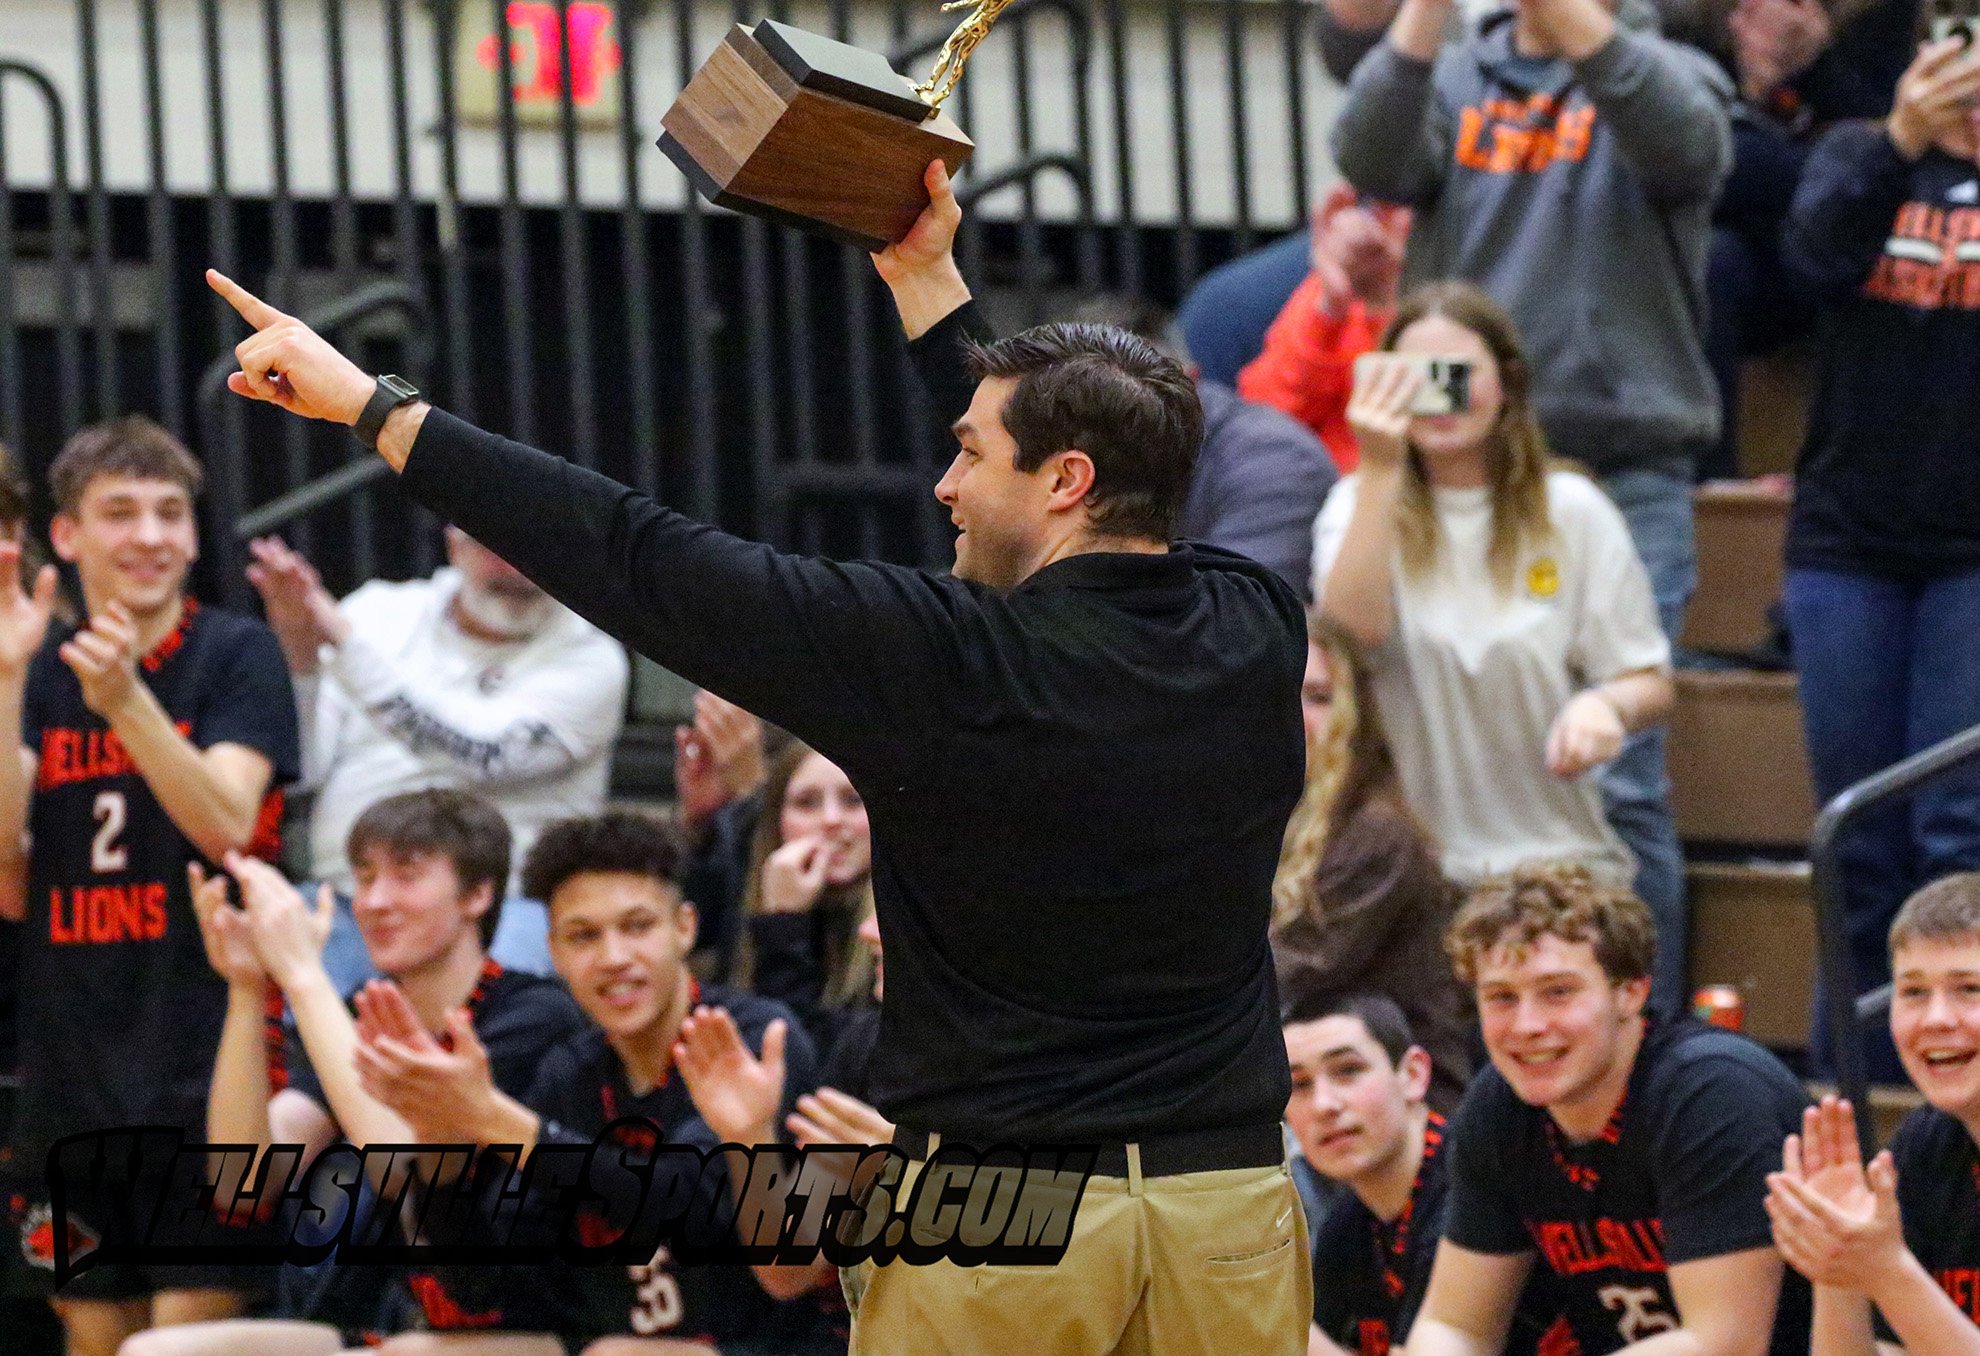  Wellsville head coach Raymie Auman points to the student section while hoisting the Class B2 Championship brick high in the air after defeating Mynderse by a 66-58 count to claim their third title in the last seven years, in Webster. [Chris Brooks/W